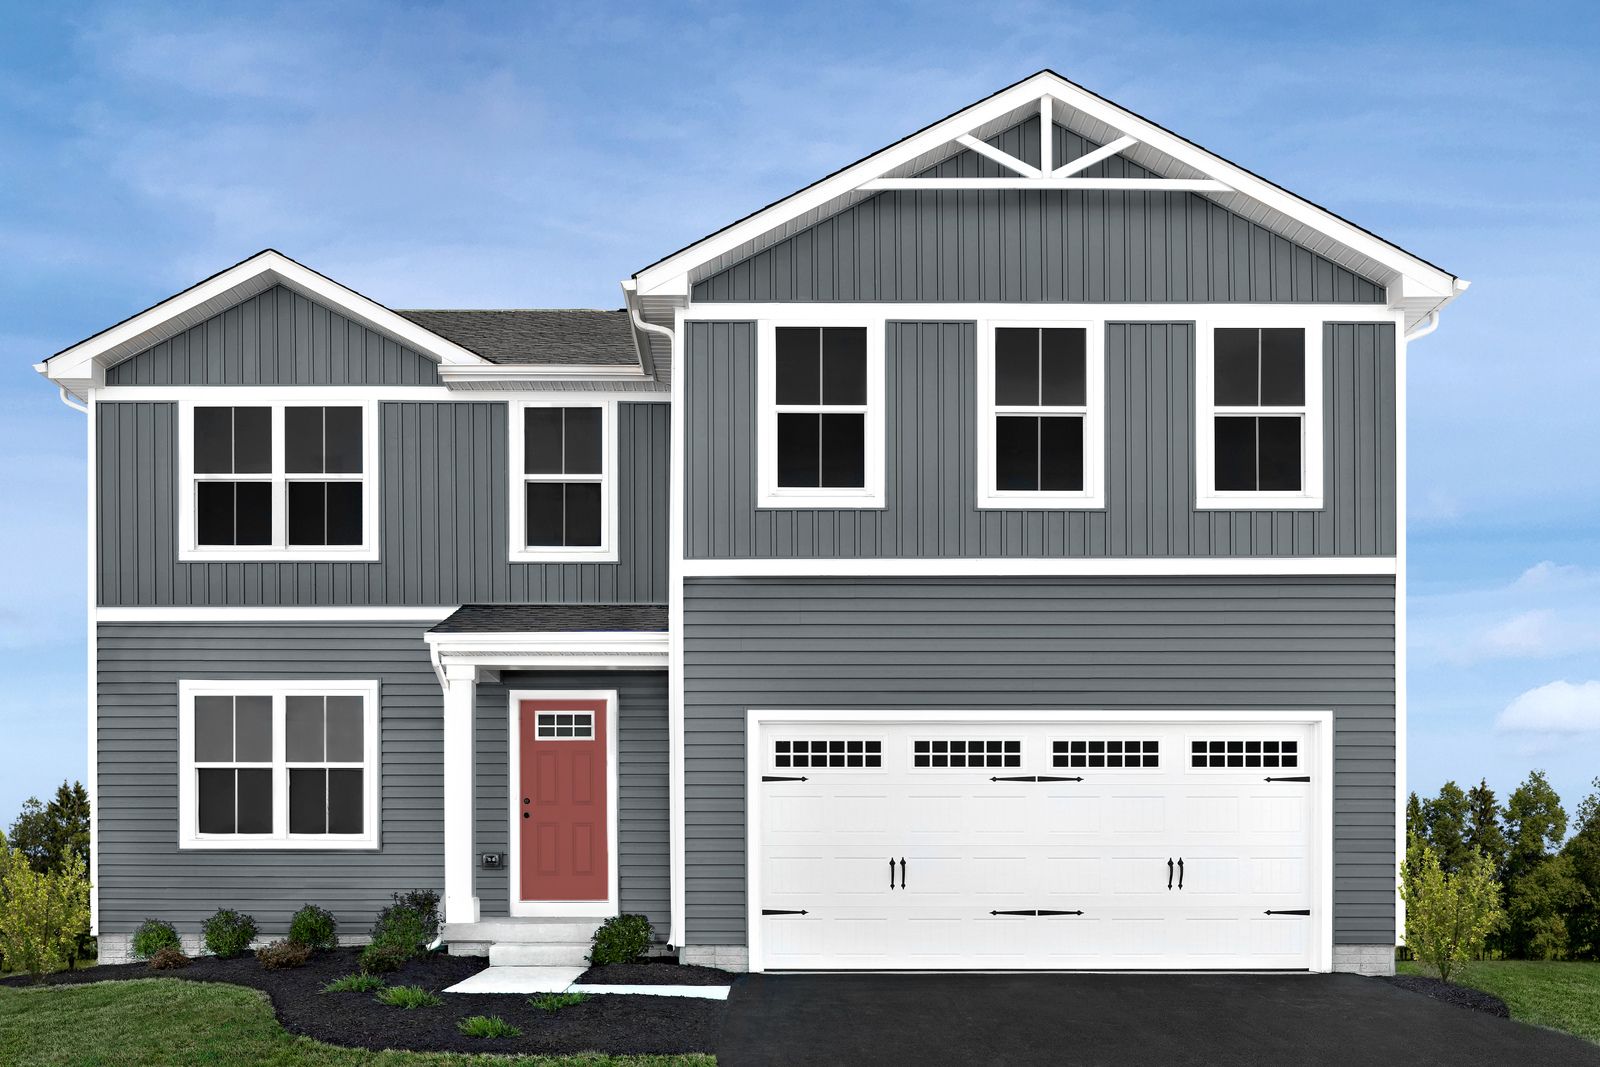 THE BEST SELLING COMMUNITY IN THE WINCHESTER AREA - VILLAGE AT MIDDLETOWN